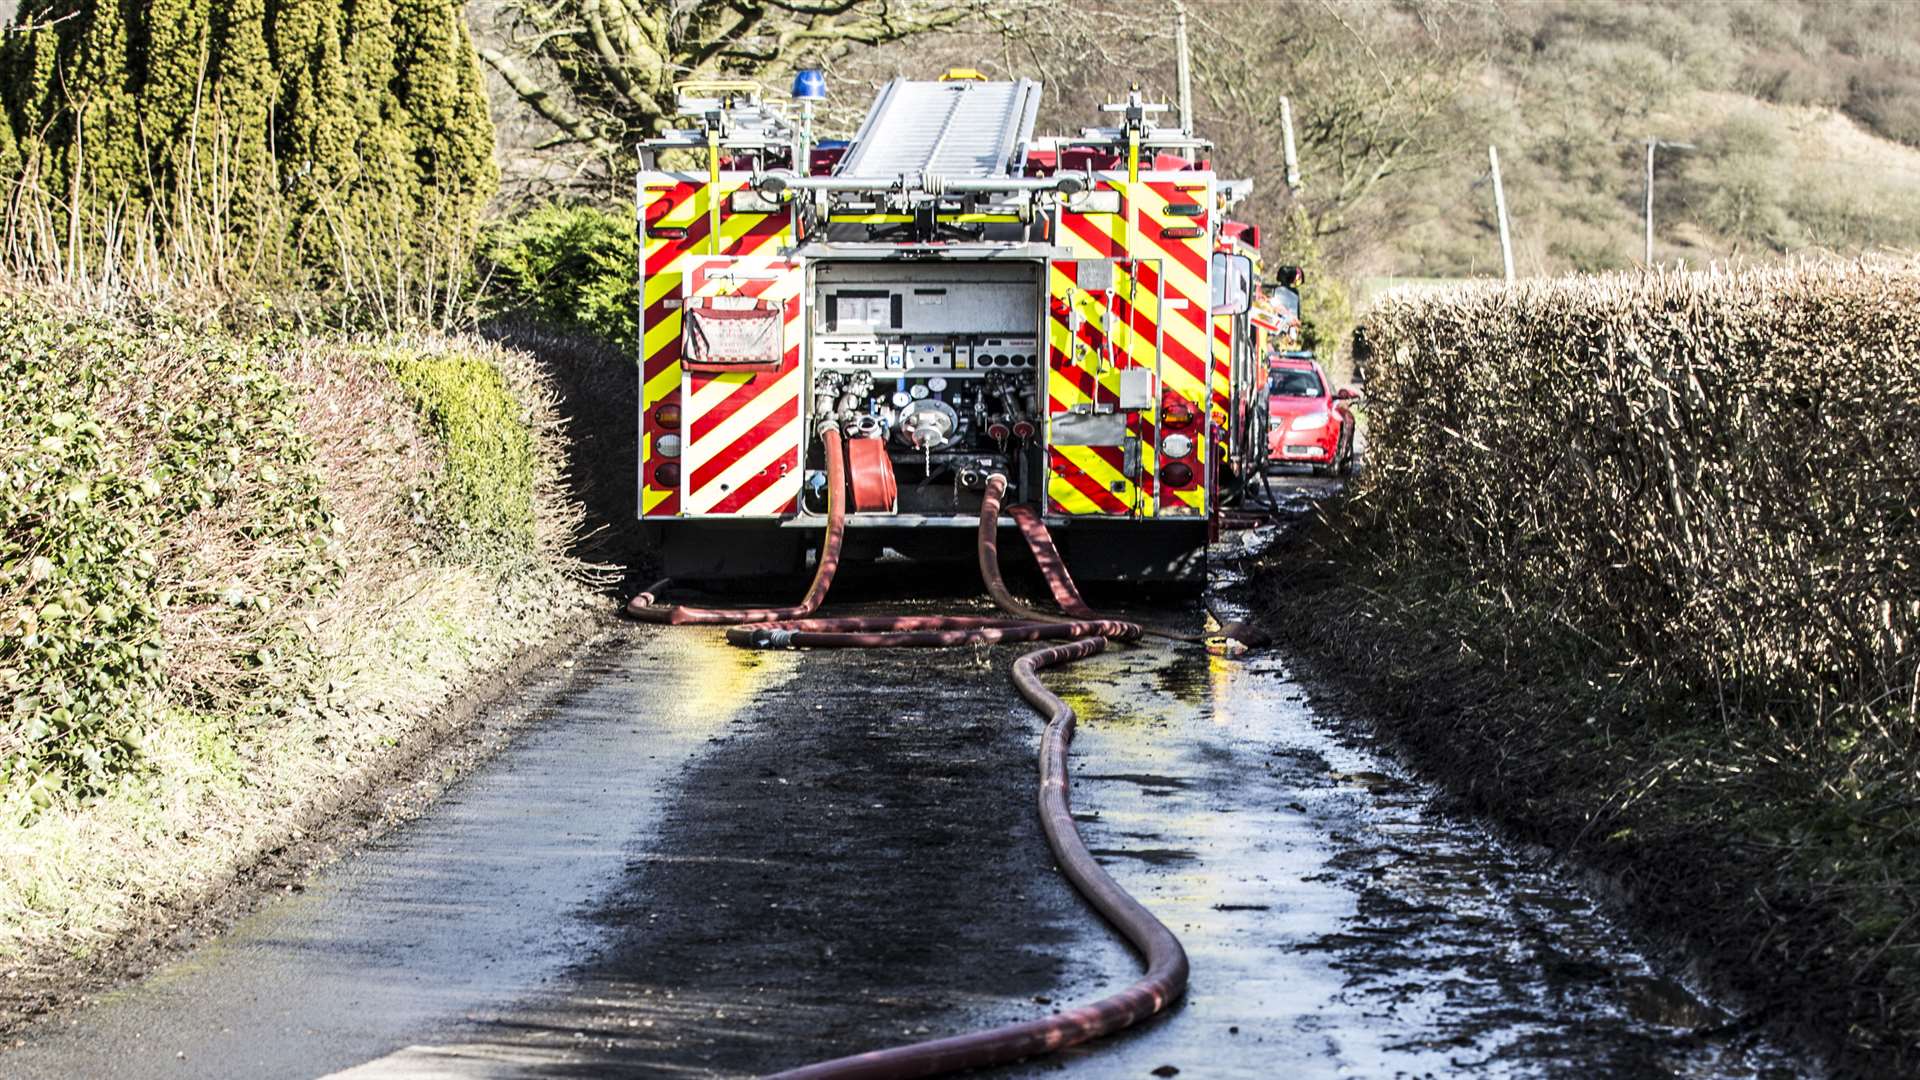 Kent Fire and Rescue Service attended the incident